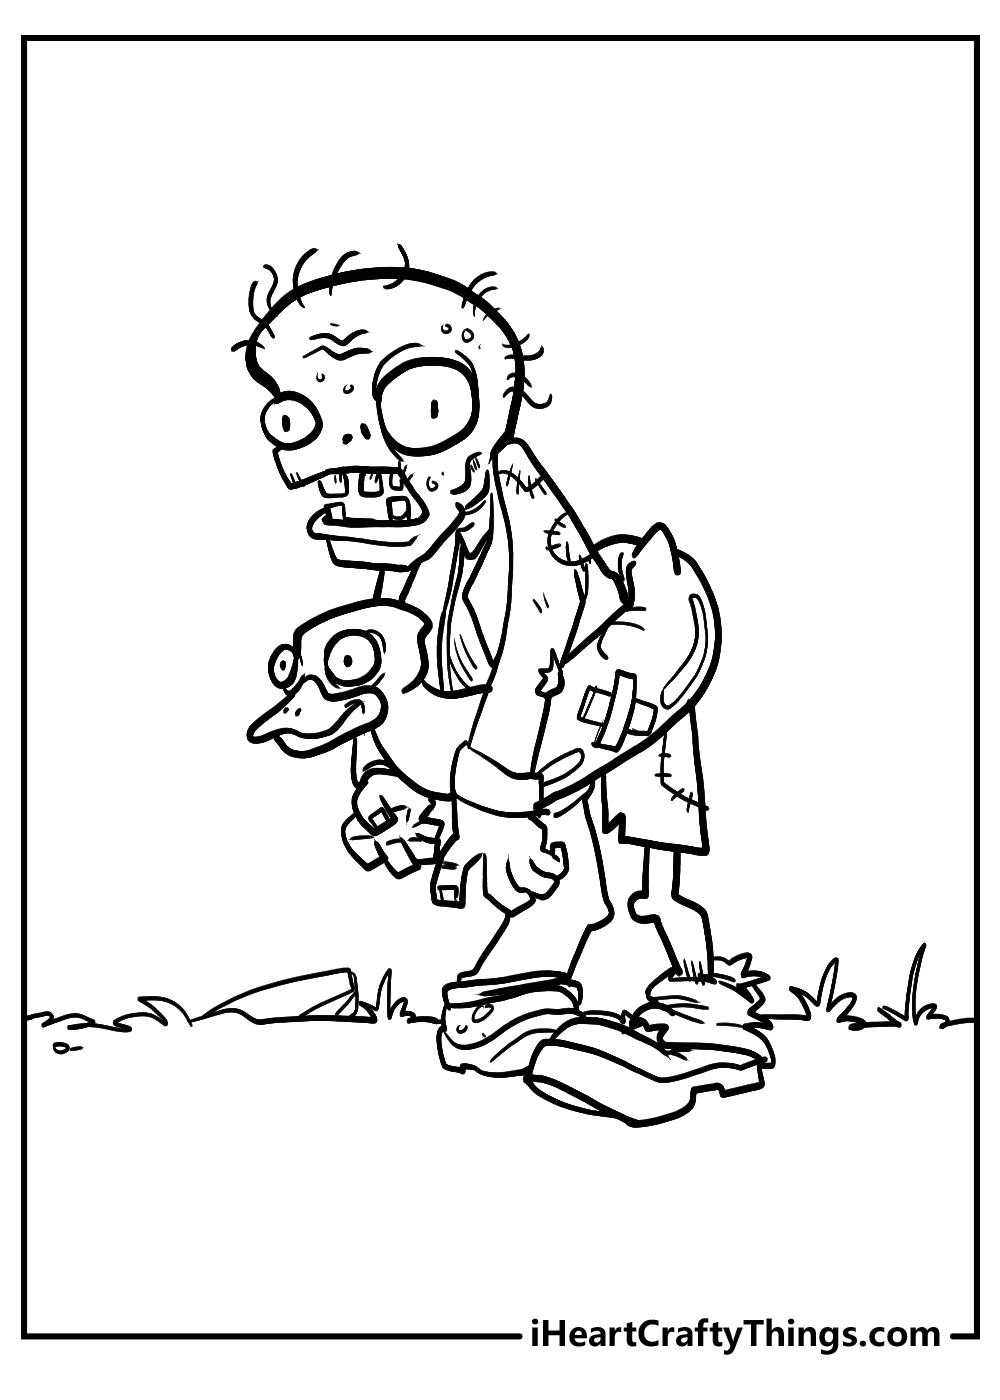 Plants and Zombies Coloring Pages